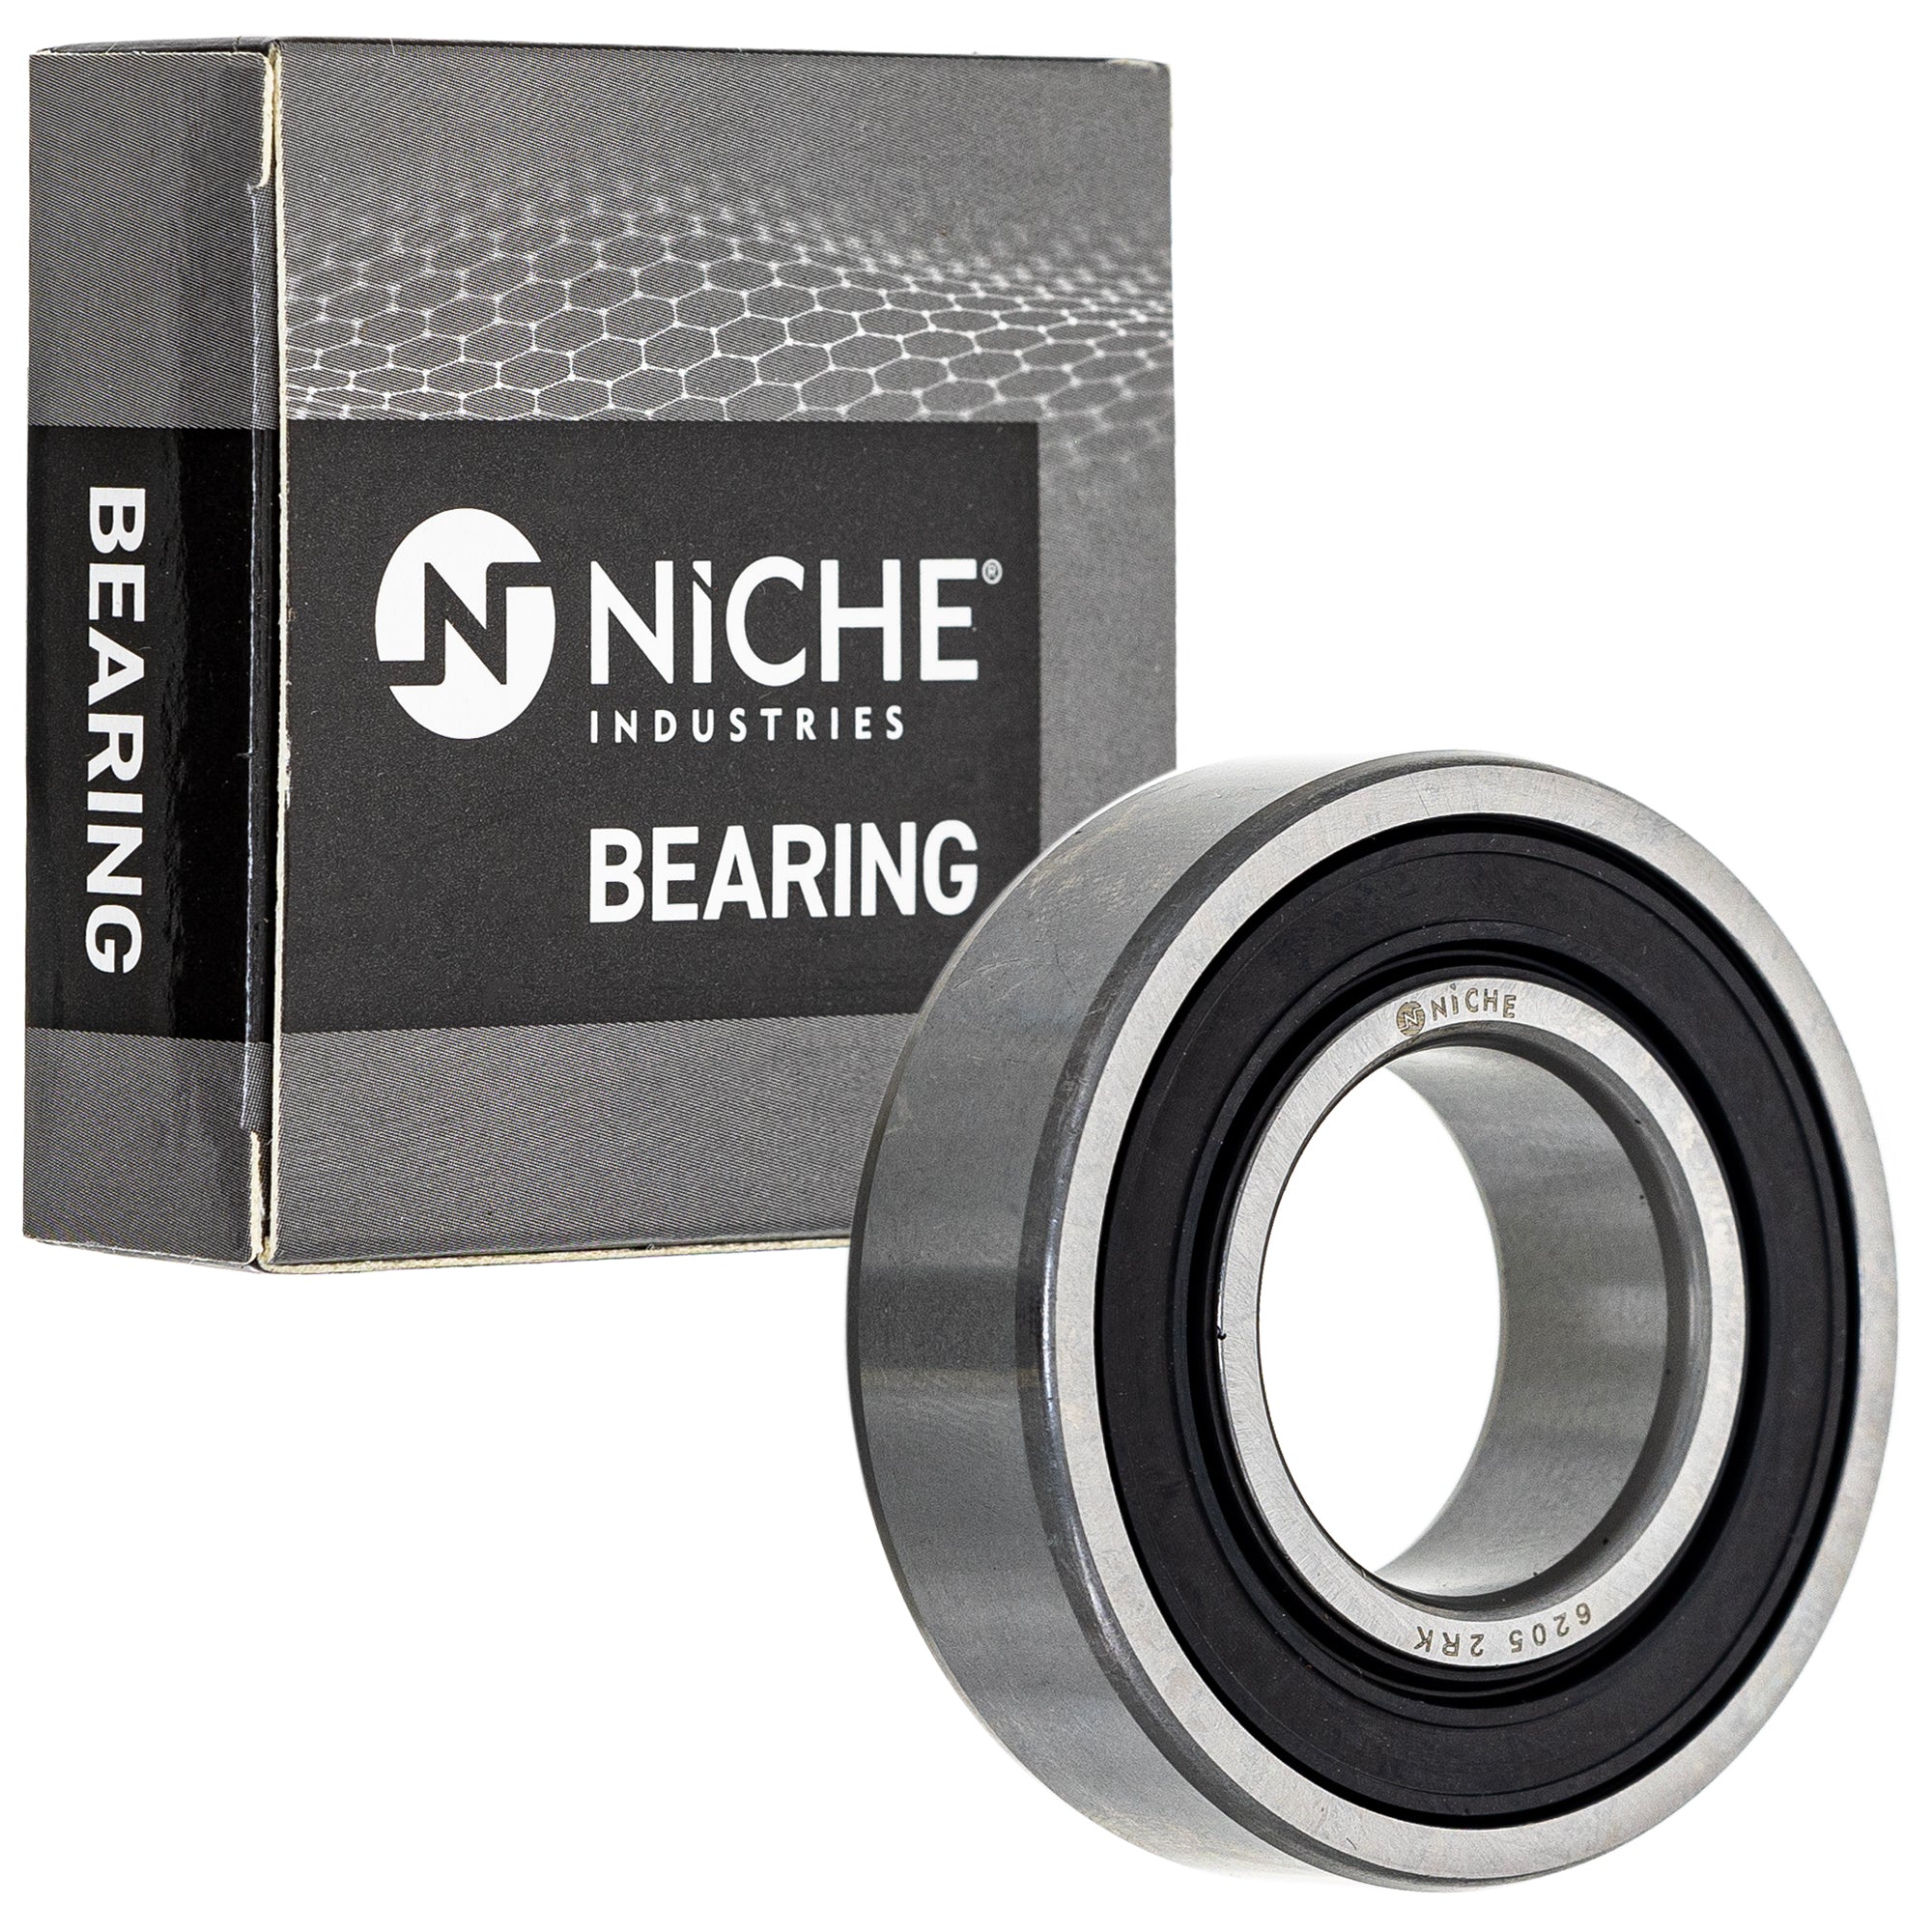 NICHE 519-CBB2322R Bearing & Seal Kit 2-Pack for zOTHER Toro